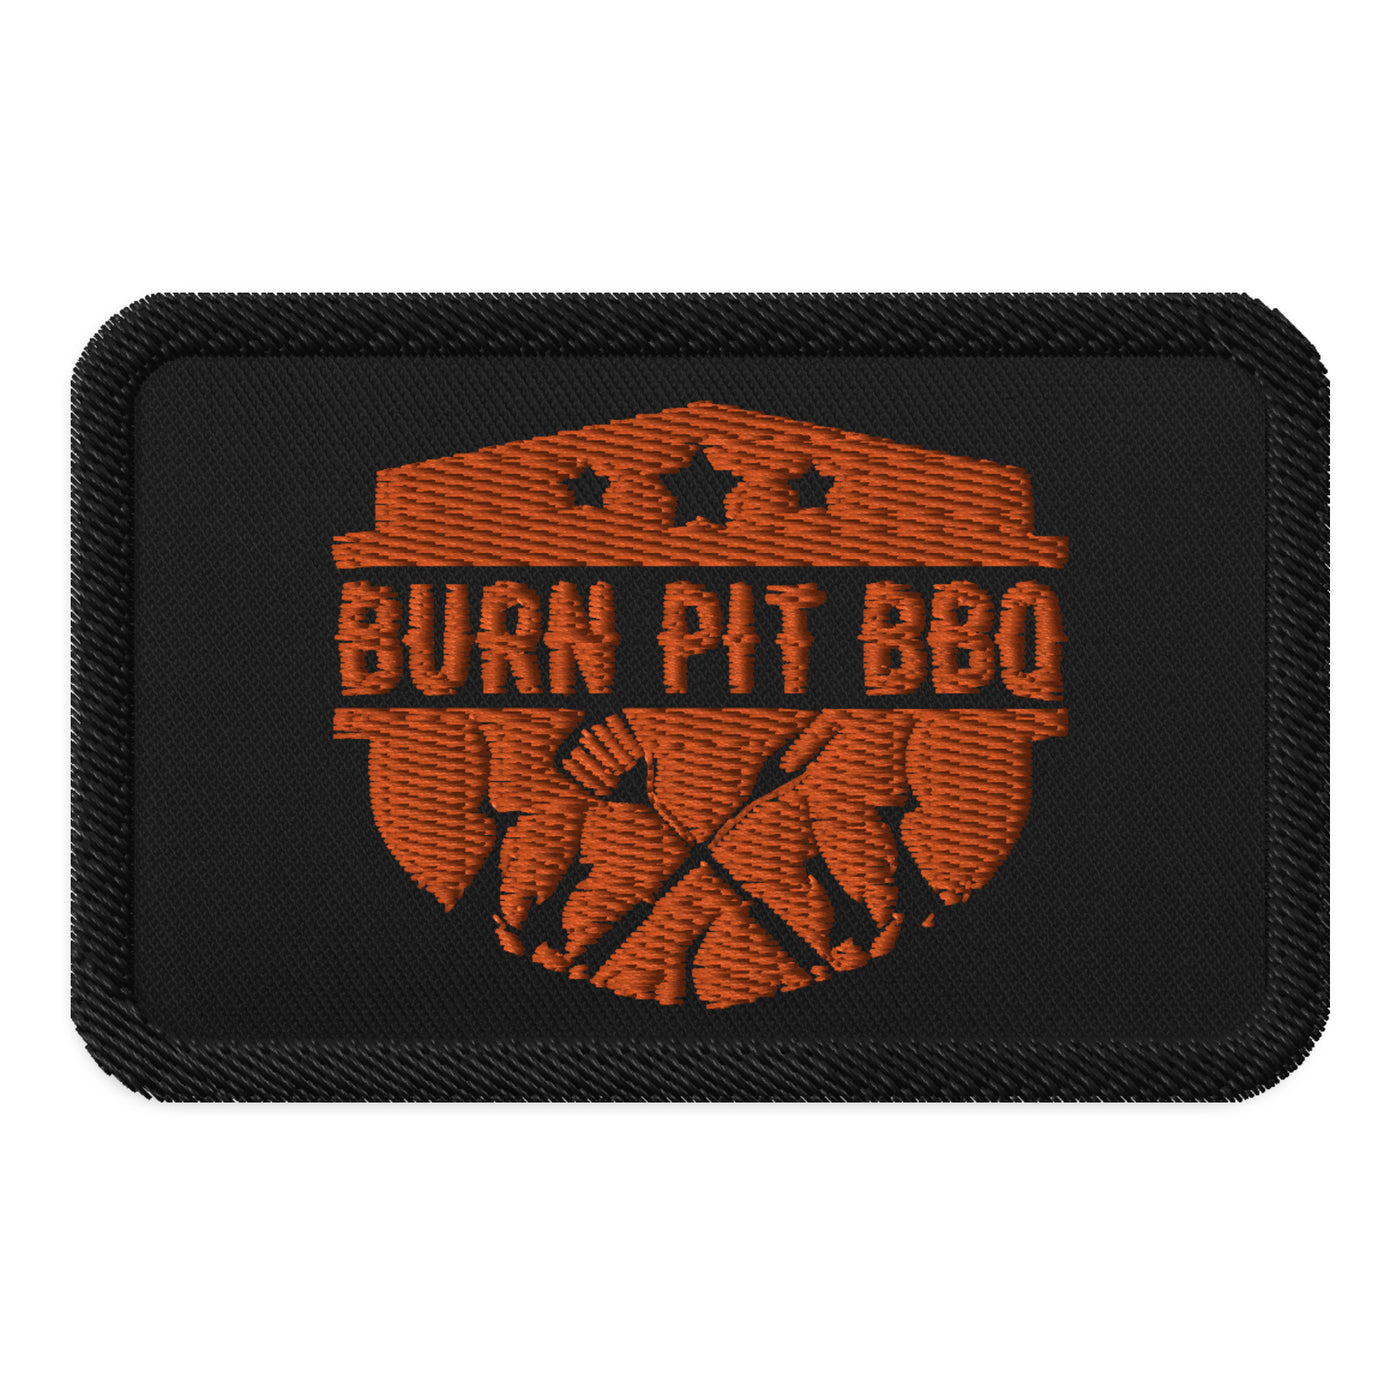 Burn Pit BBBQ Embroidered patches